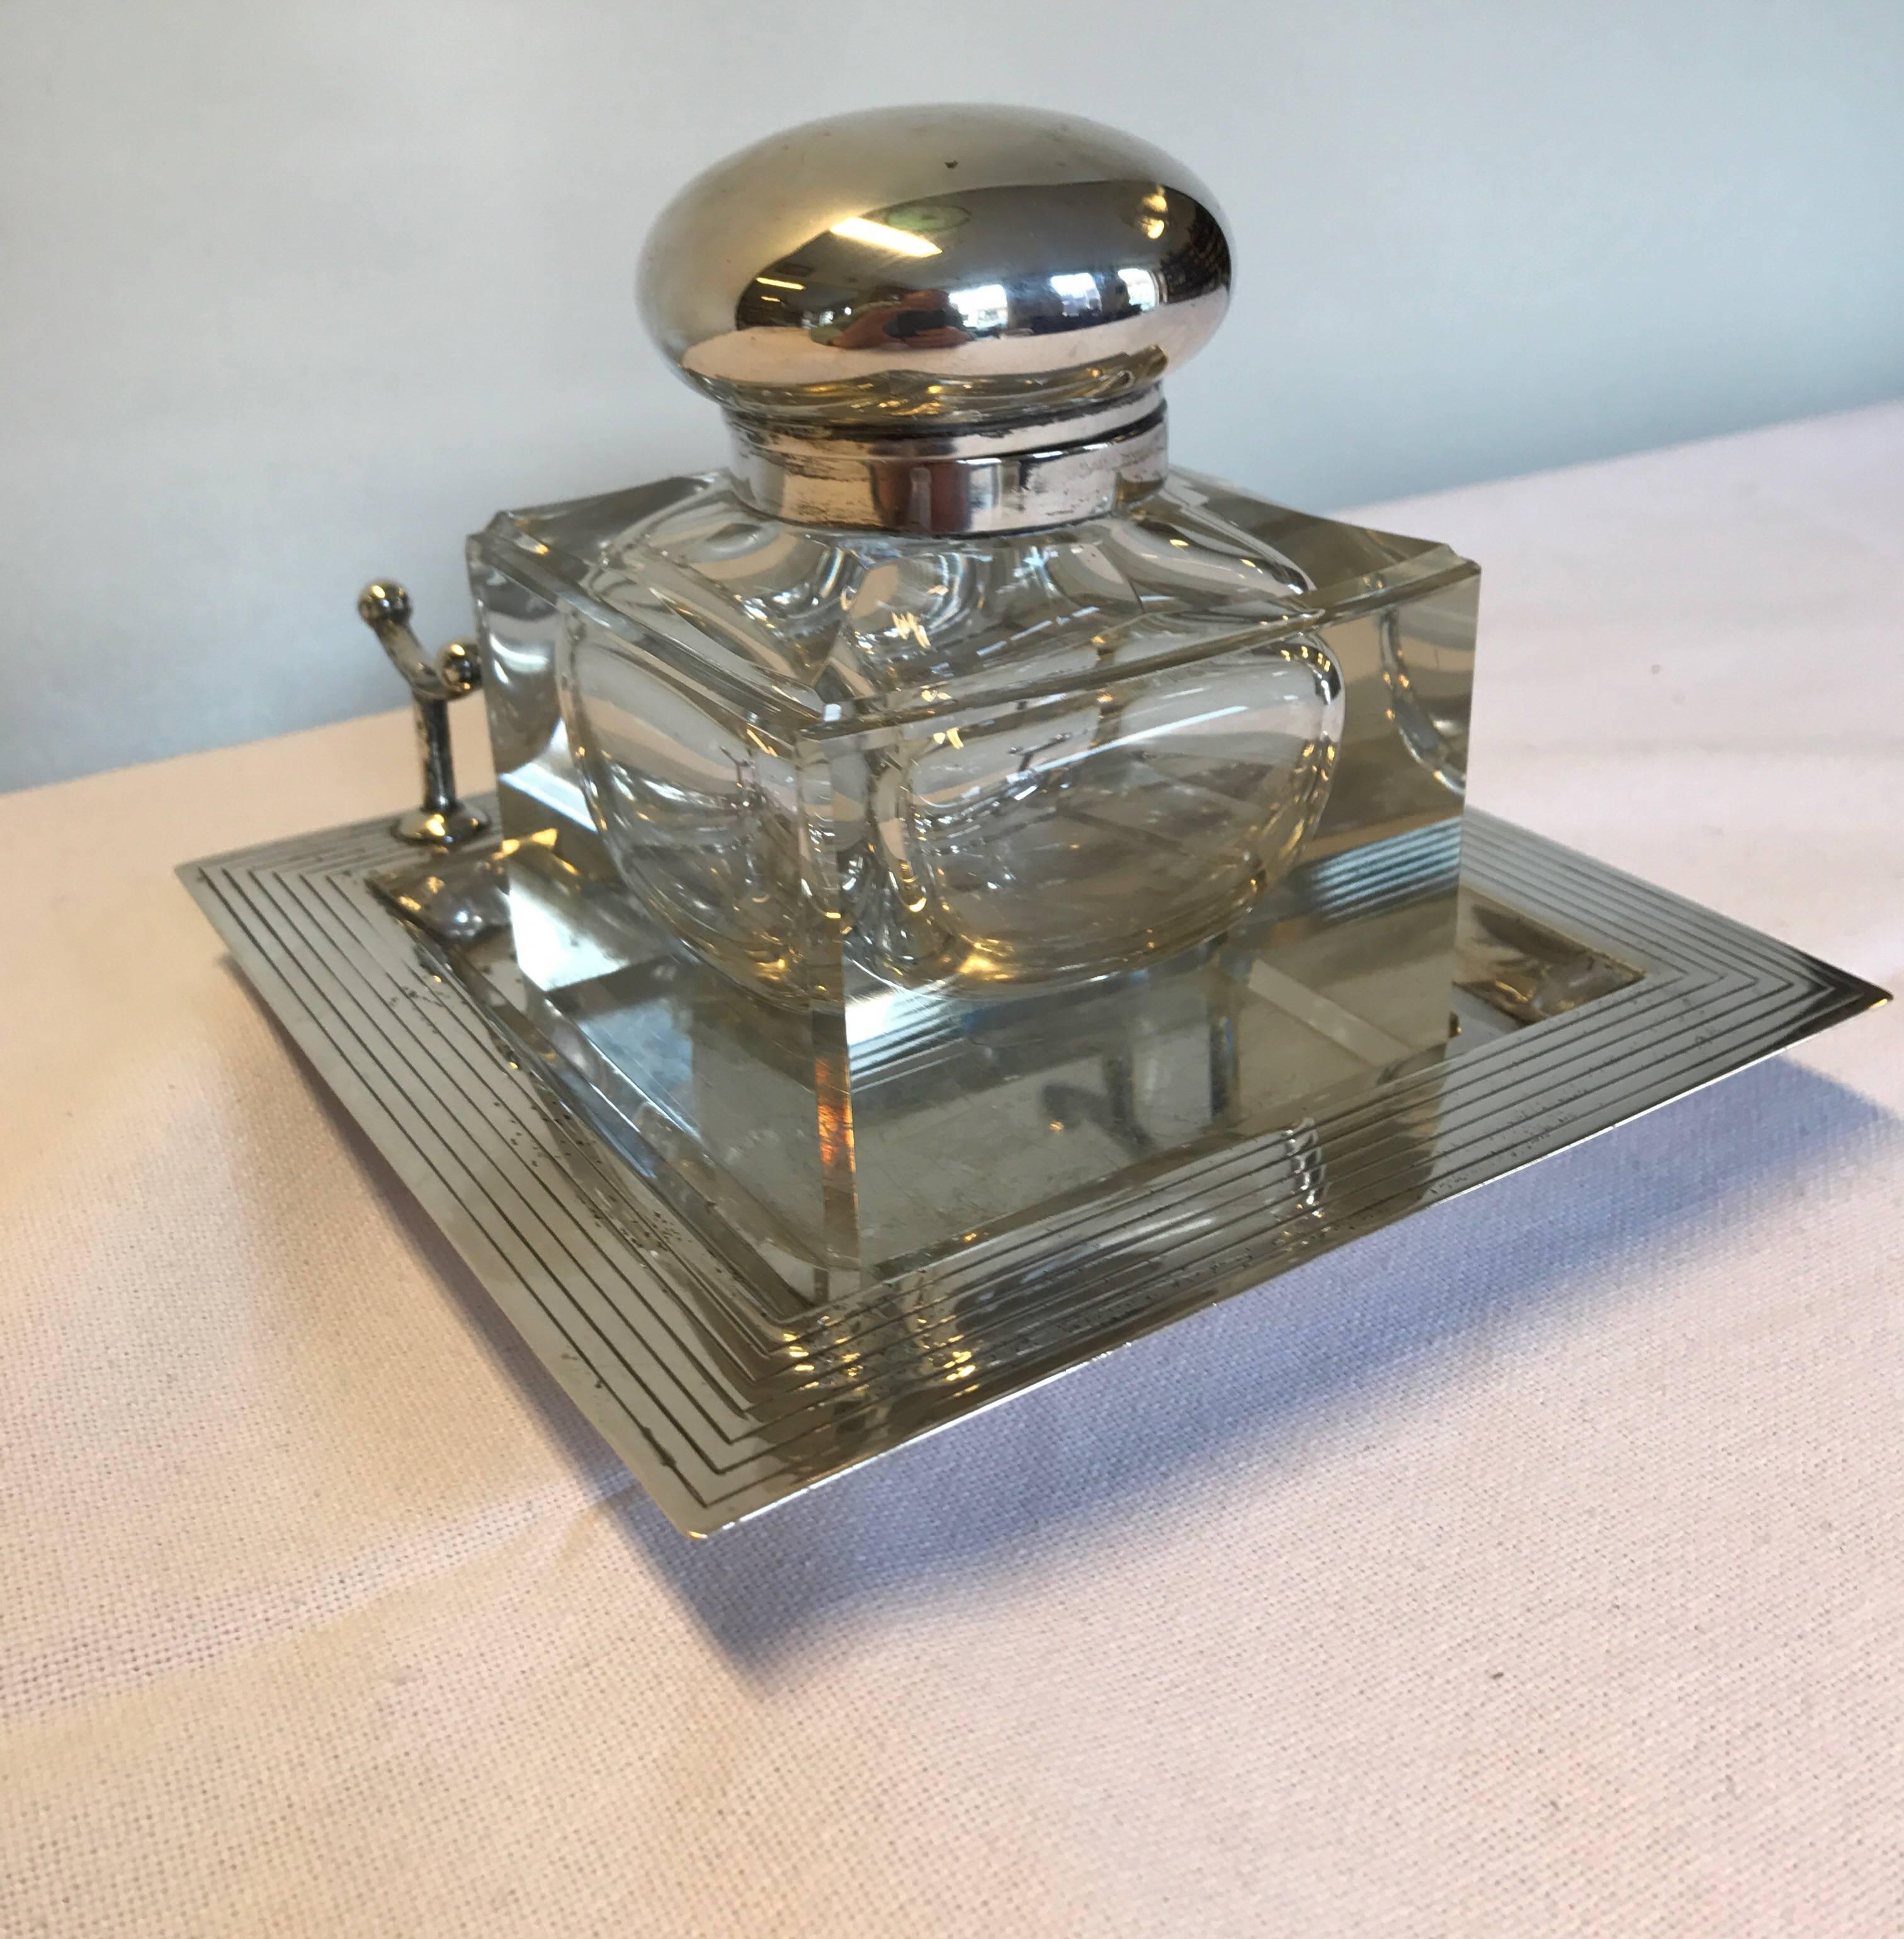 Early 20th Century Silver and Crystal Inkwell from 1920s Denmark Copenhagen, Master Stamp C.H.F